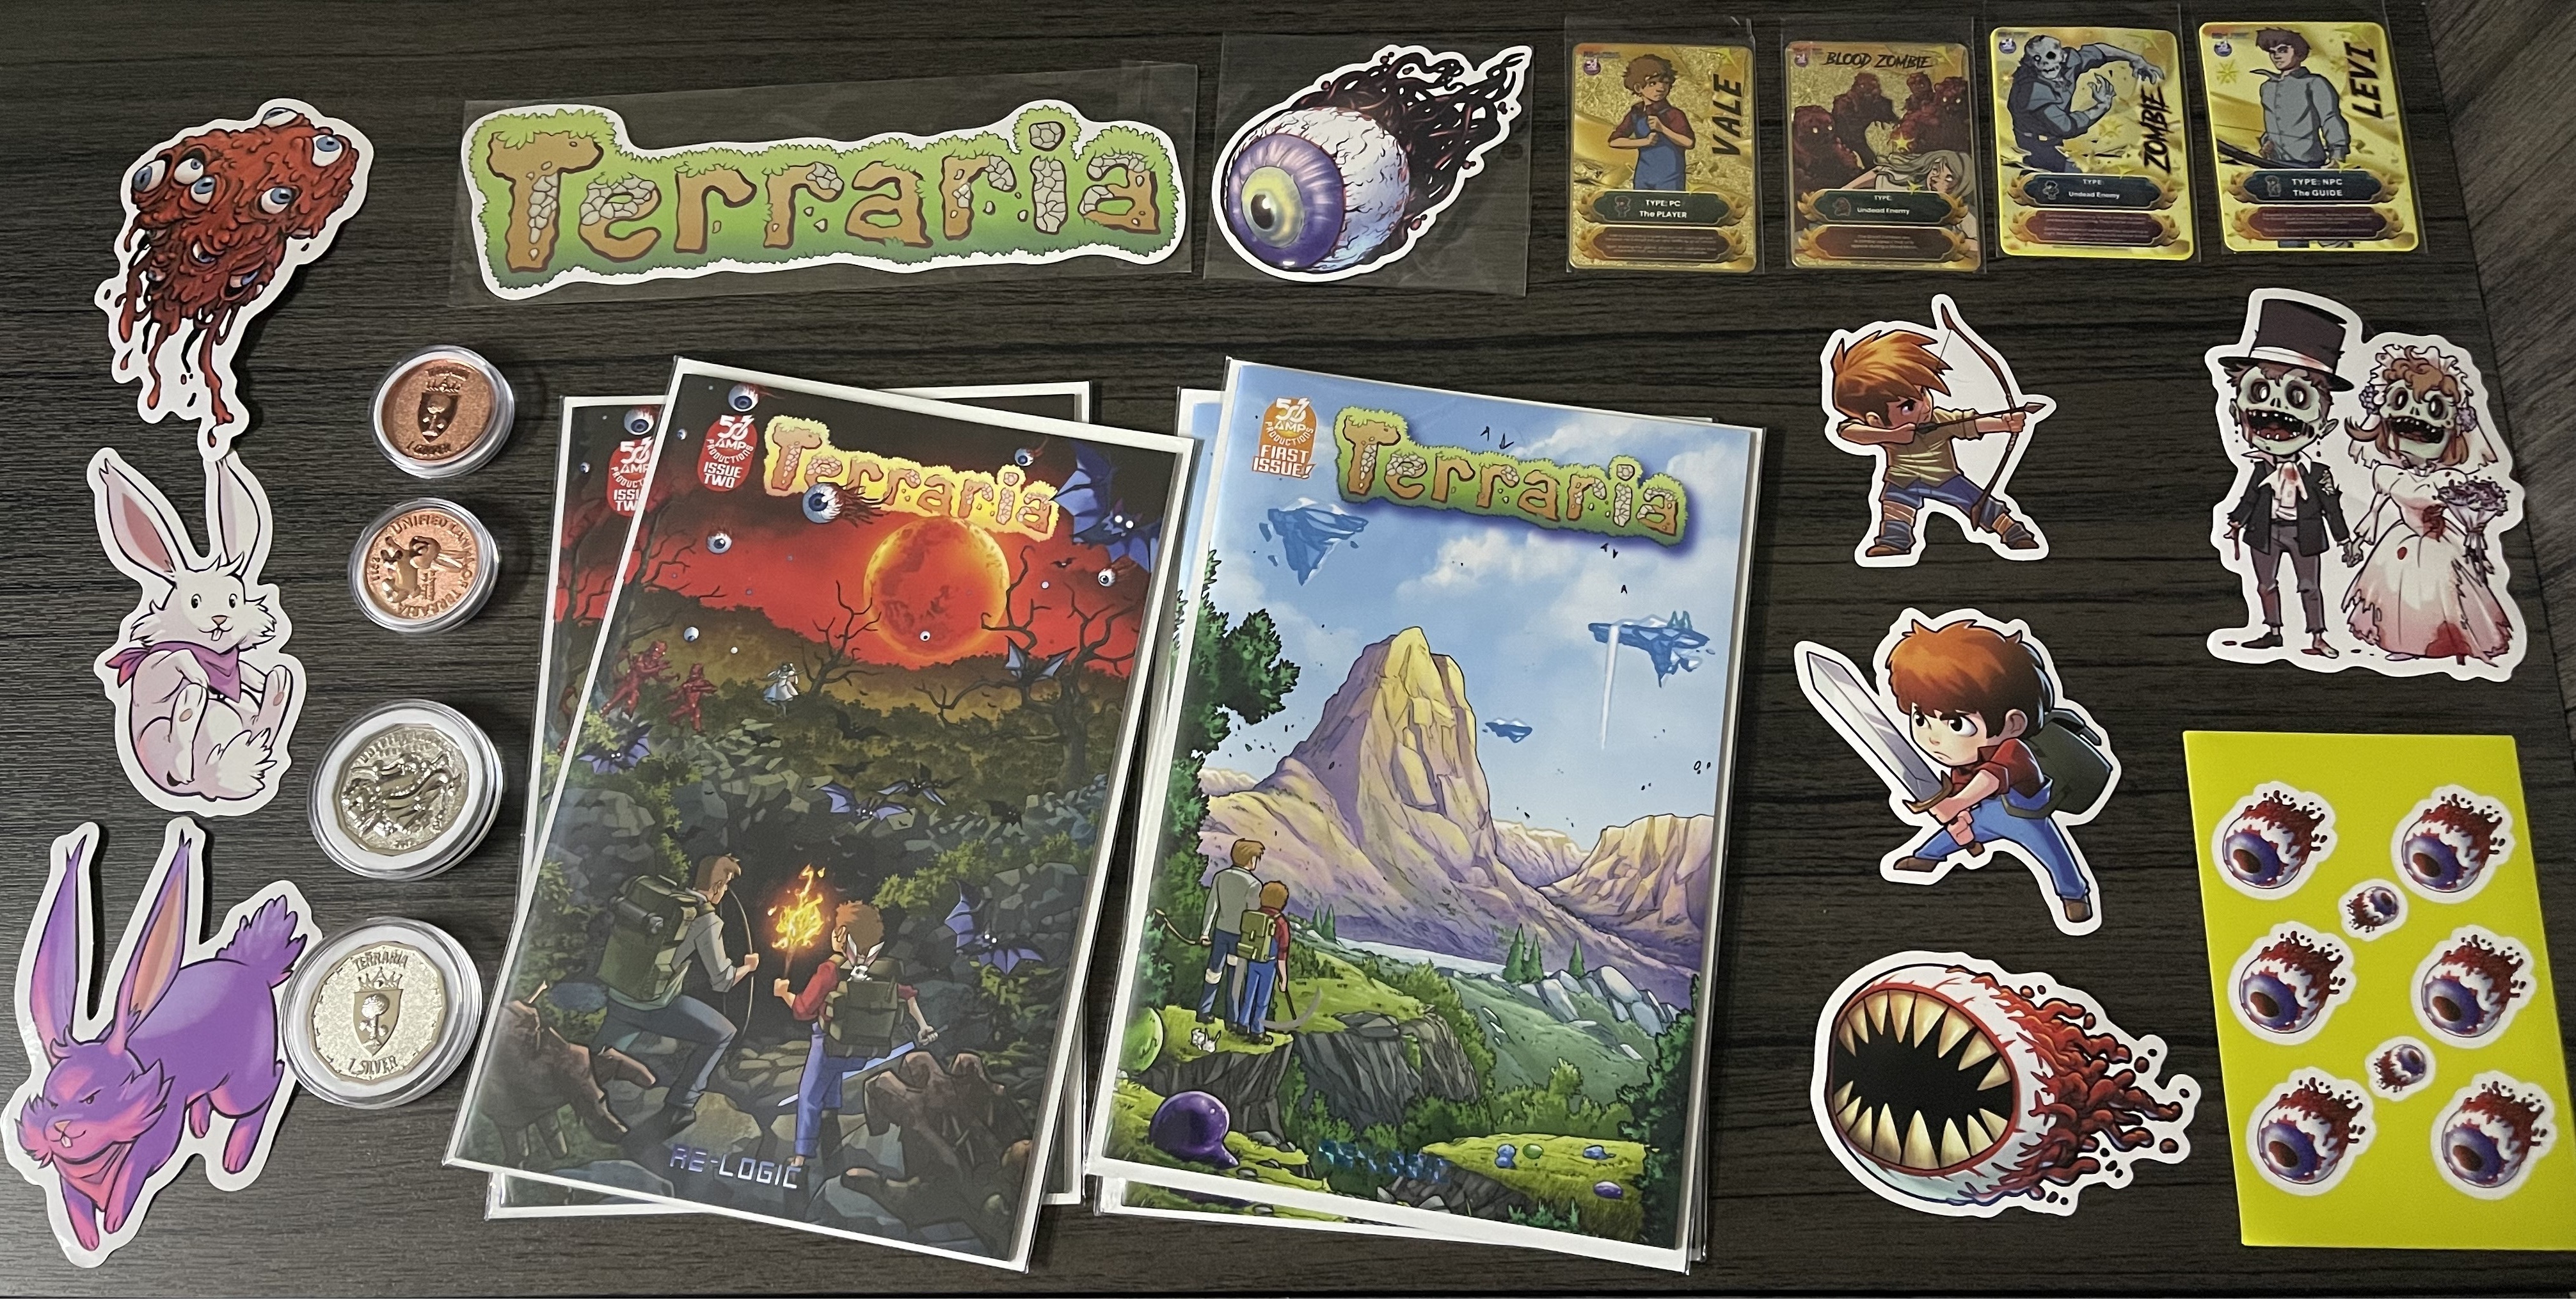 Get Ready for ⛏ Terraria: The Board Game!